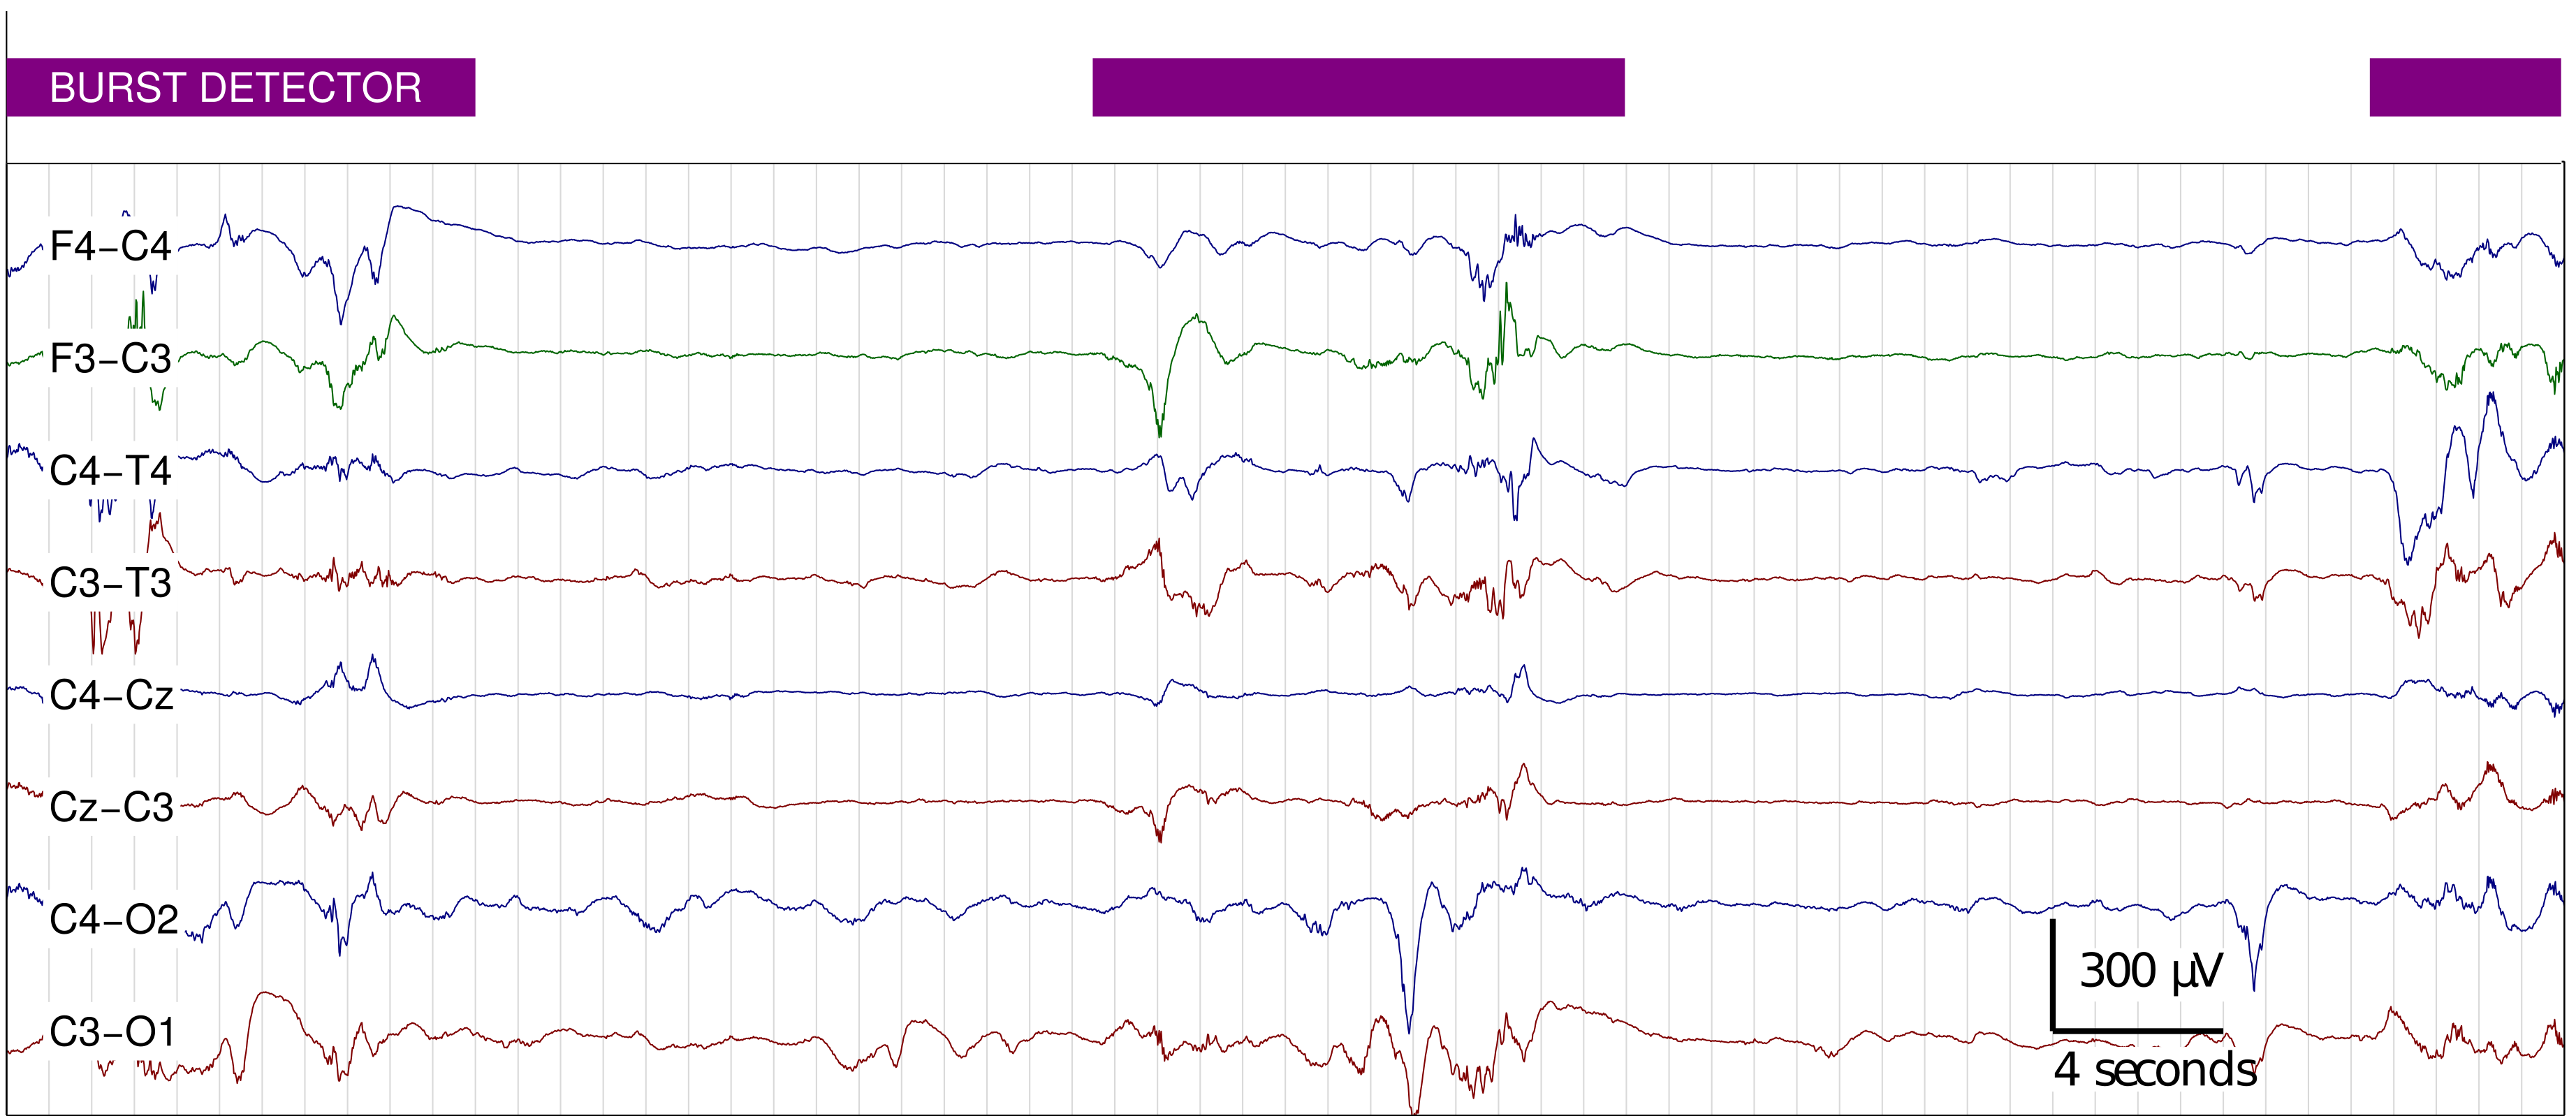 Example of burst detector (purple annotation) on channel F3-C3